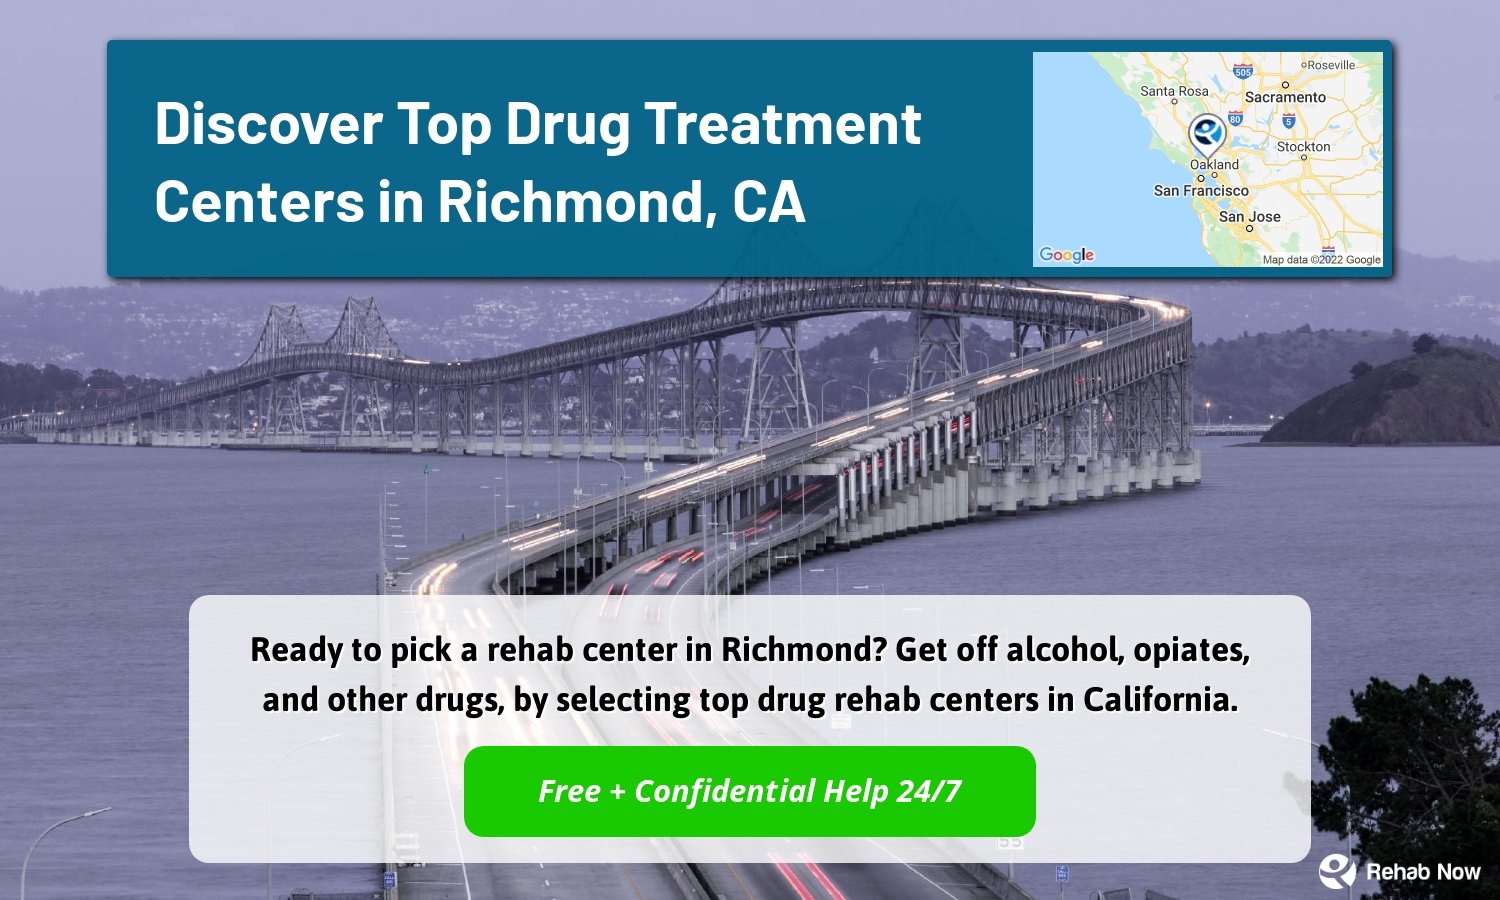 Ready to pick a rehab center in Richmond? Get off alcohol, opiates, and other drugs, by selecting top drug rehab centers in California.